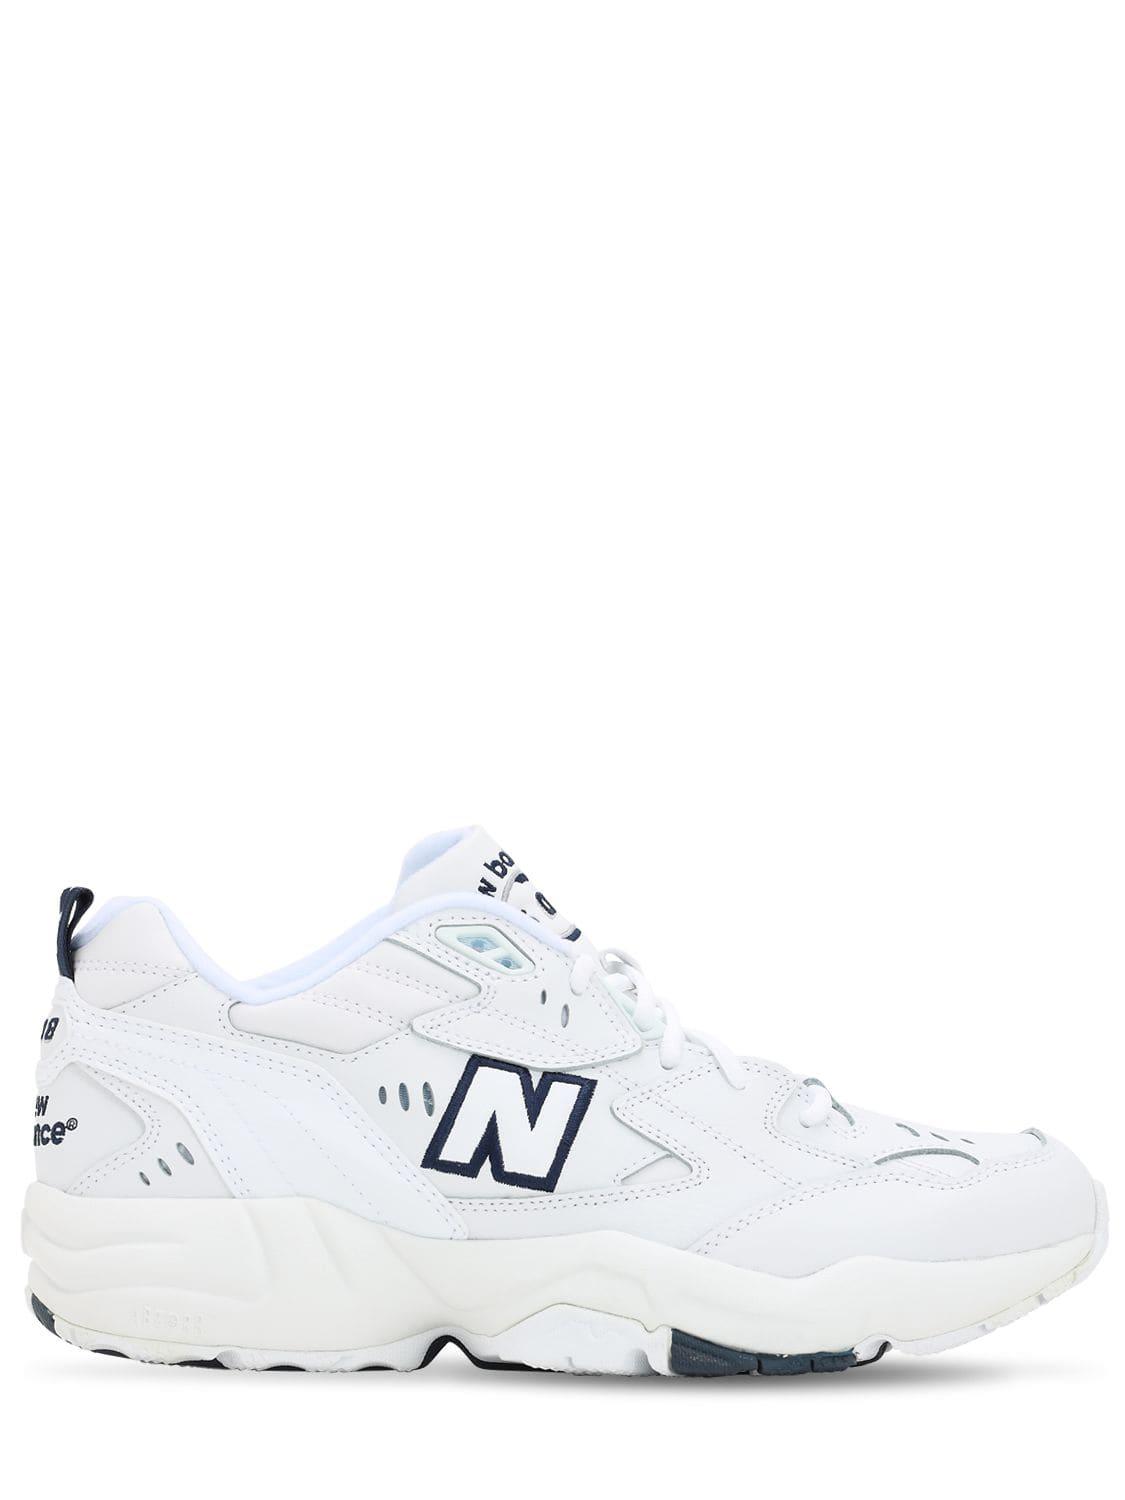 New Balance 608 Sneakers in White - Lyst